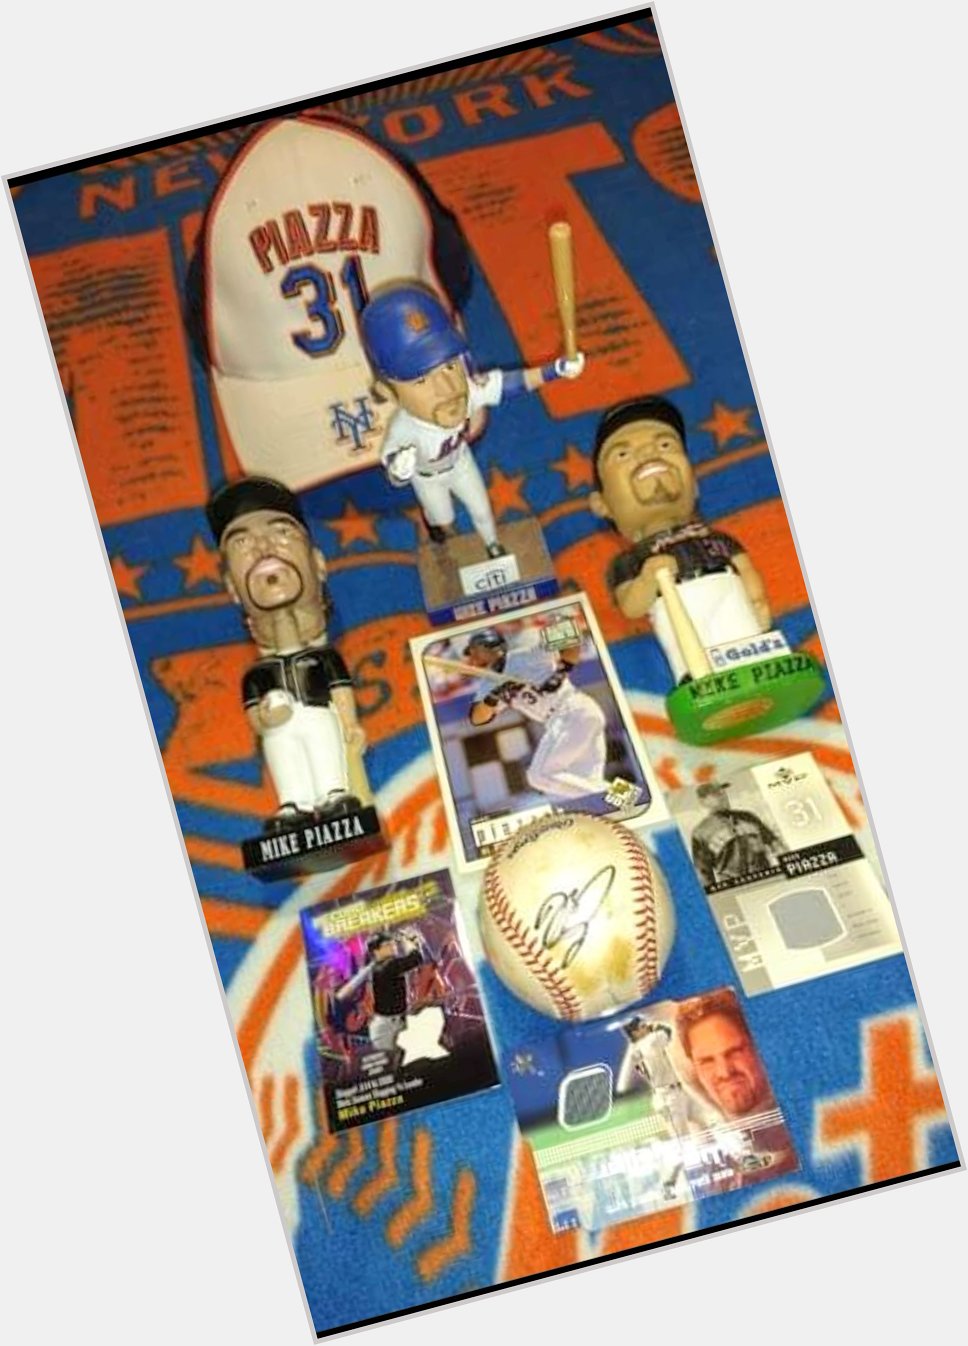  Happy Birthday HOFer Mike Piazza
Have A Great Day...    